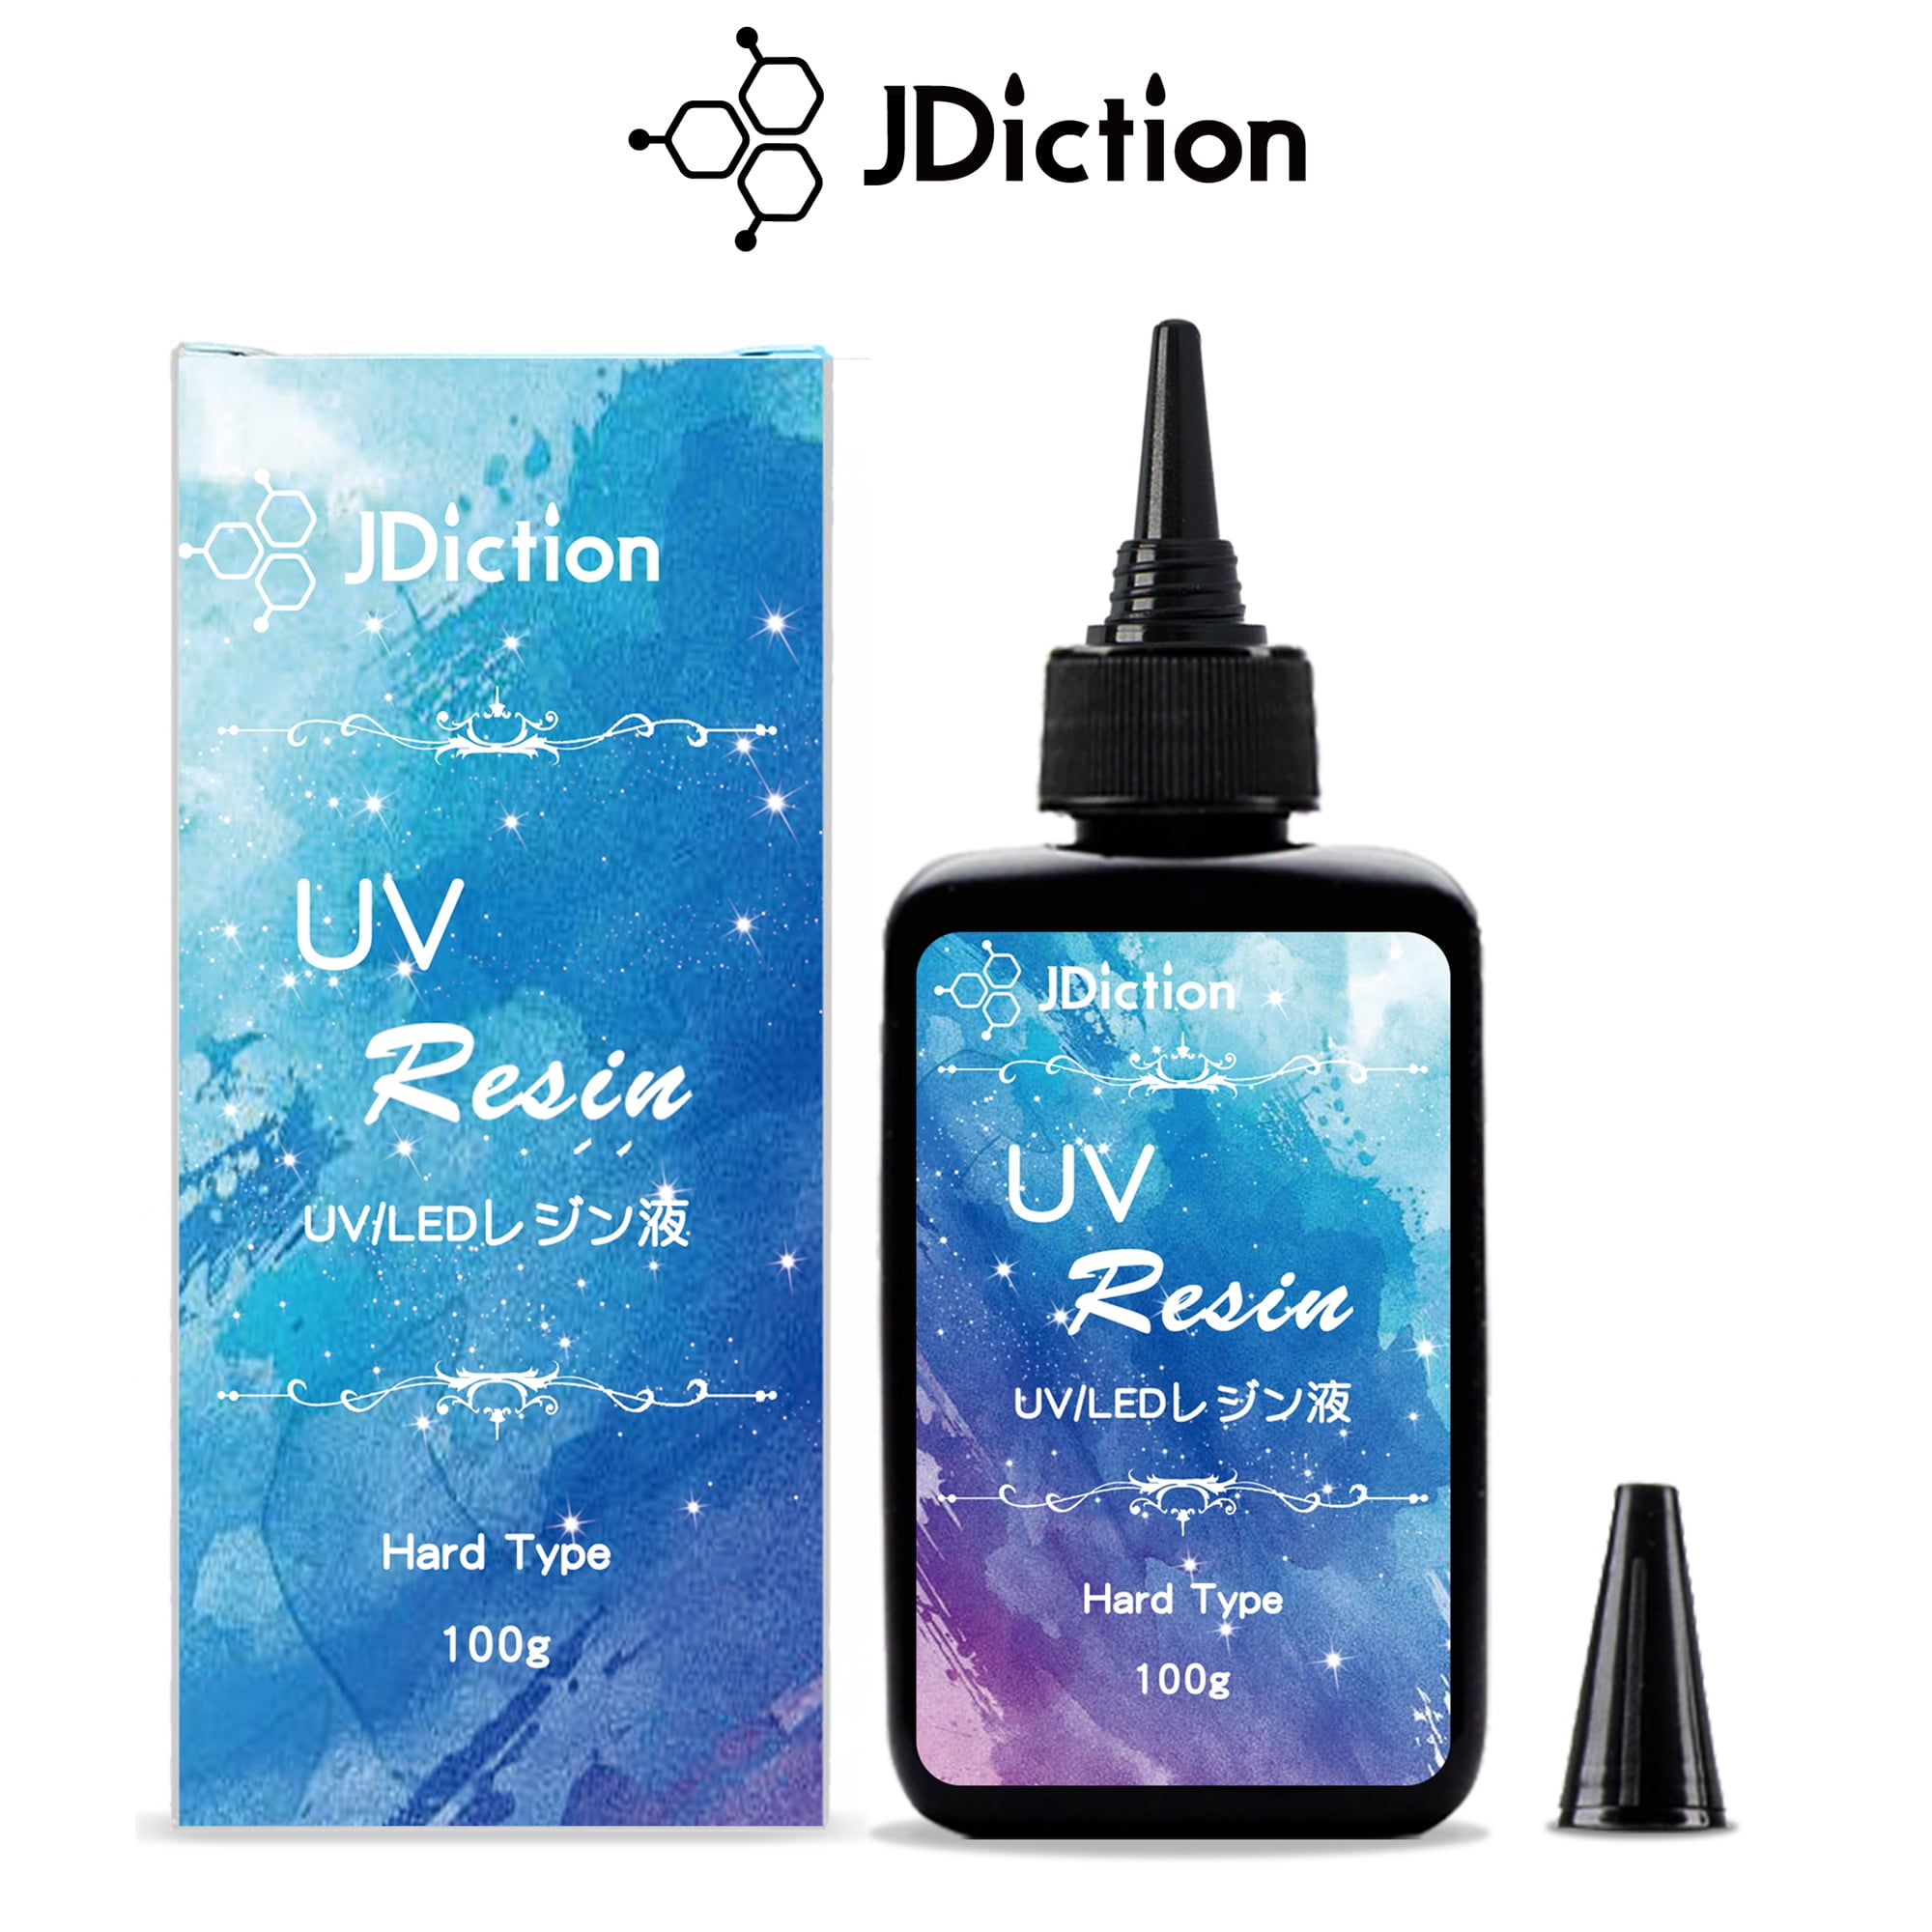  JDiction 200g UV Resin, New Formula Crystal Clear UV Resin  Solar Cure Sunlight Activated Hard UV Resin Kit for Jewelry Making, Casting  and Coating DIY Crafts : Arts, Crafts & Sewing